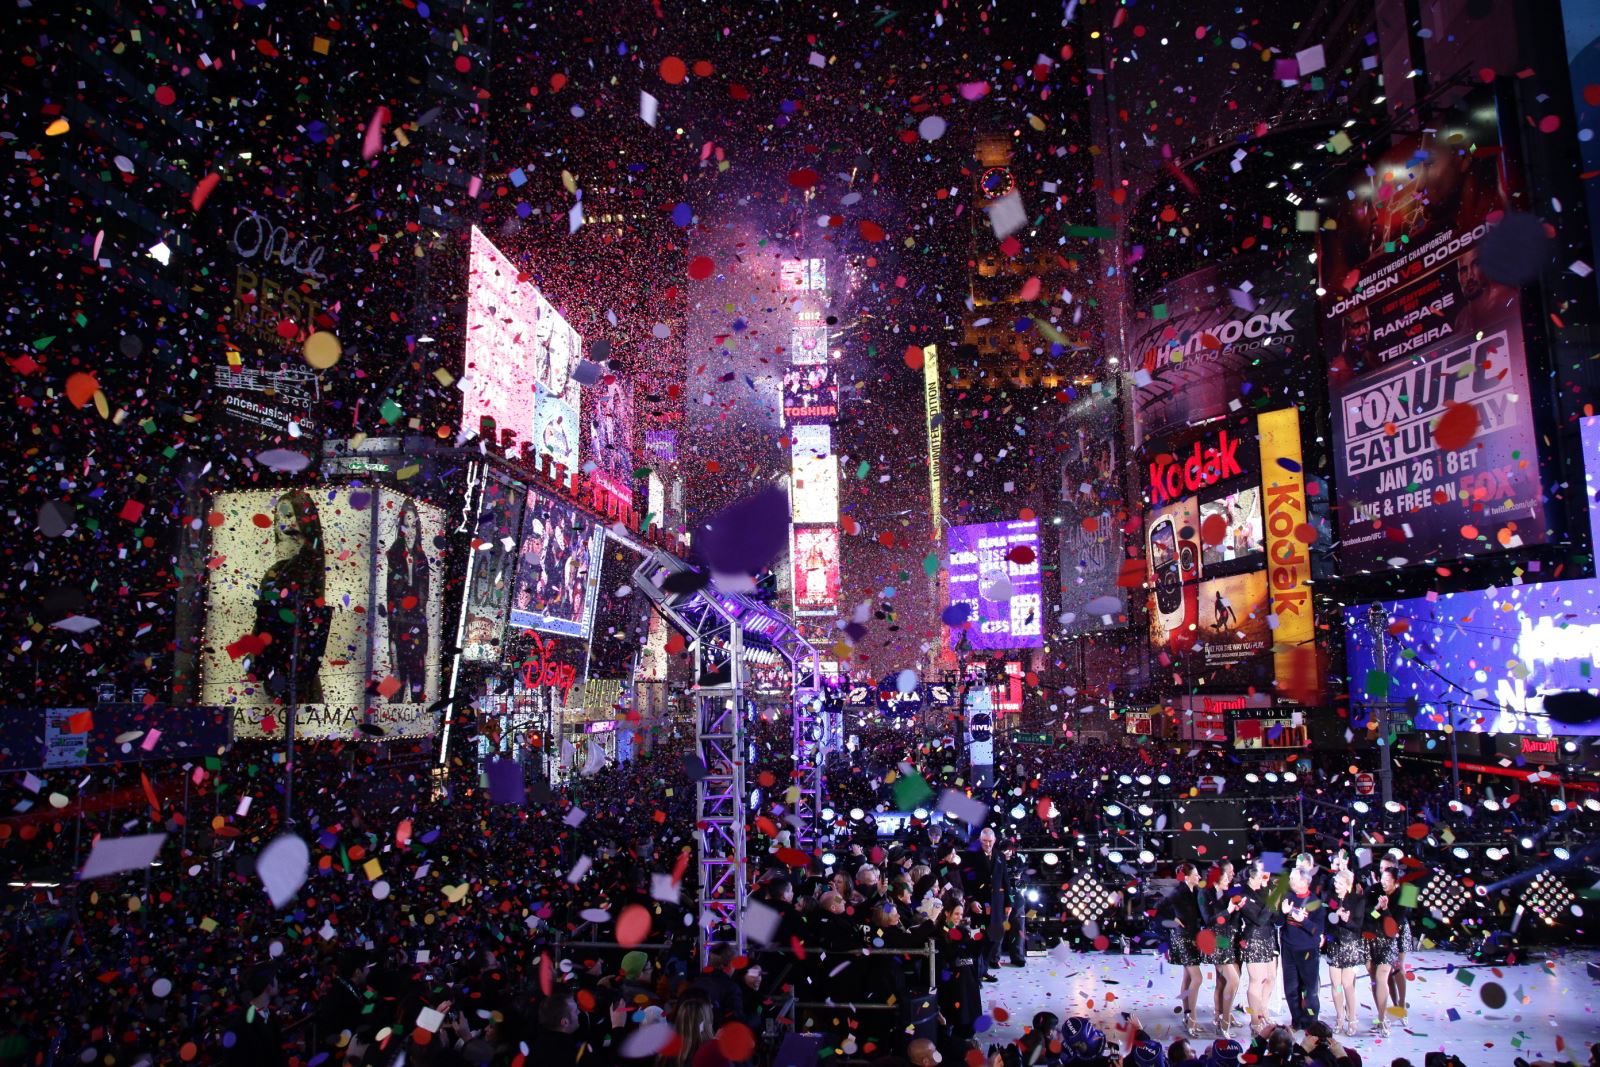 New-York-City-New-Year-2013-Ball-Drop-in-Times-Square-room-suggestion